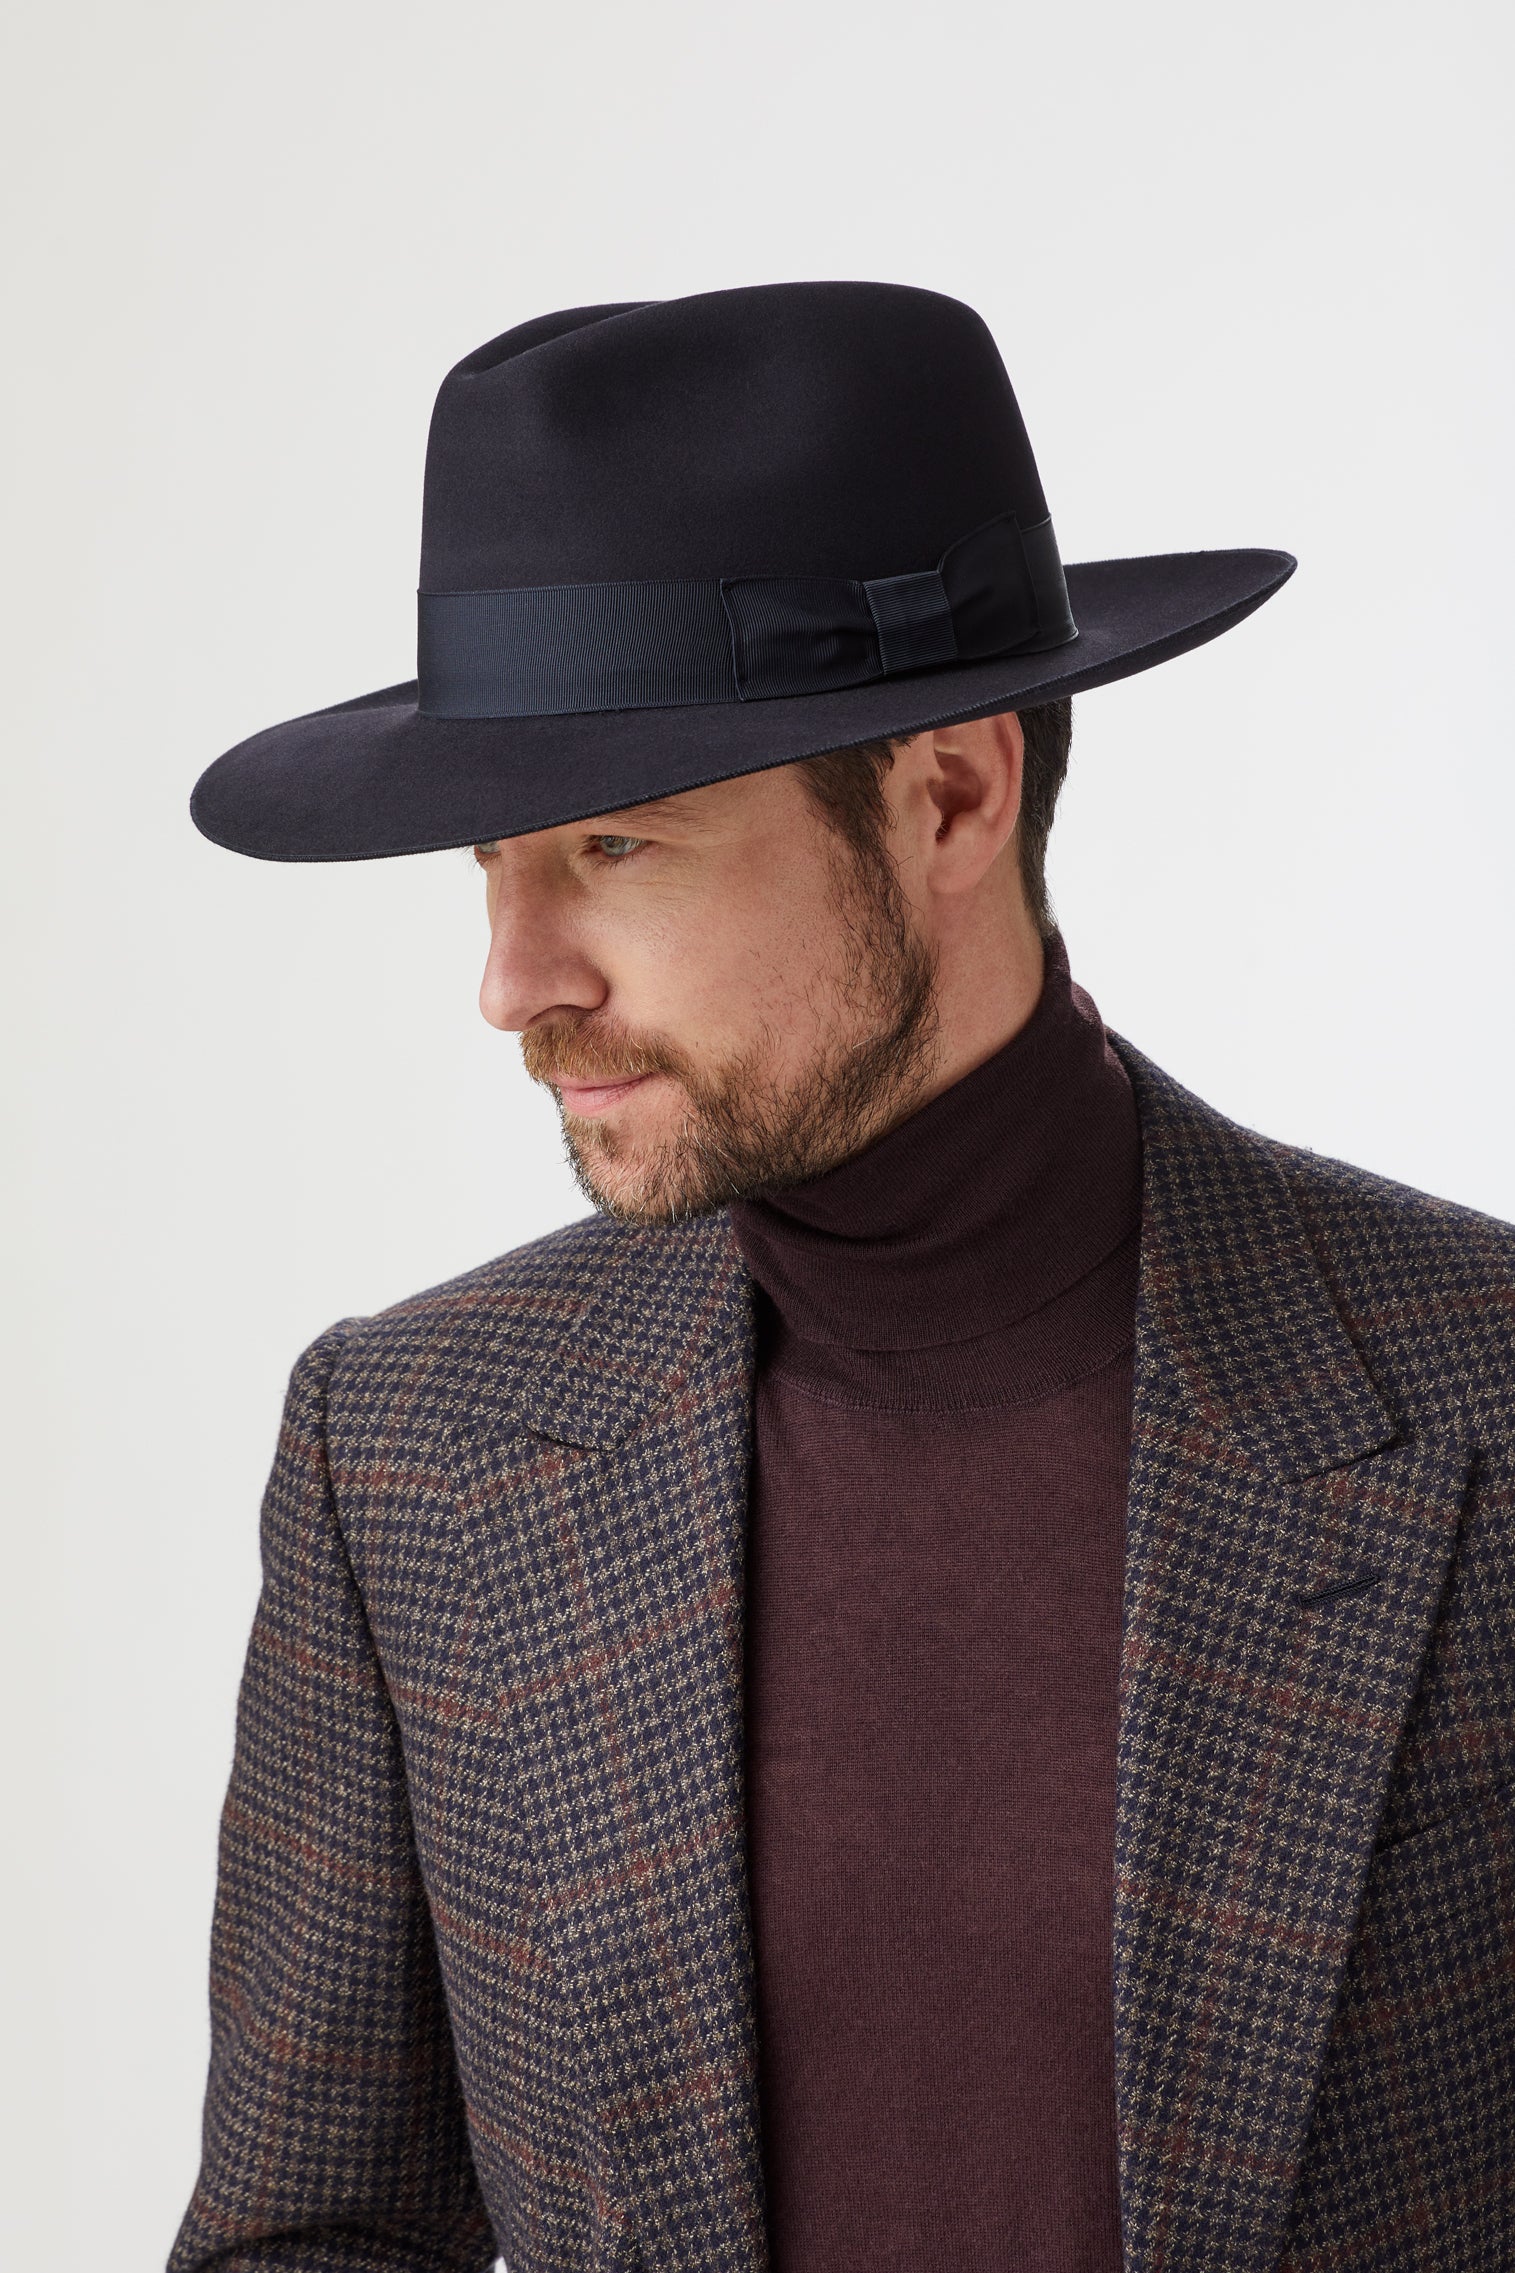 Dreadnought Fedora - Limited Edition Collection - Lock & Co. Hatters London UK